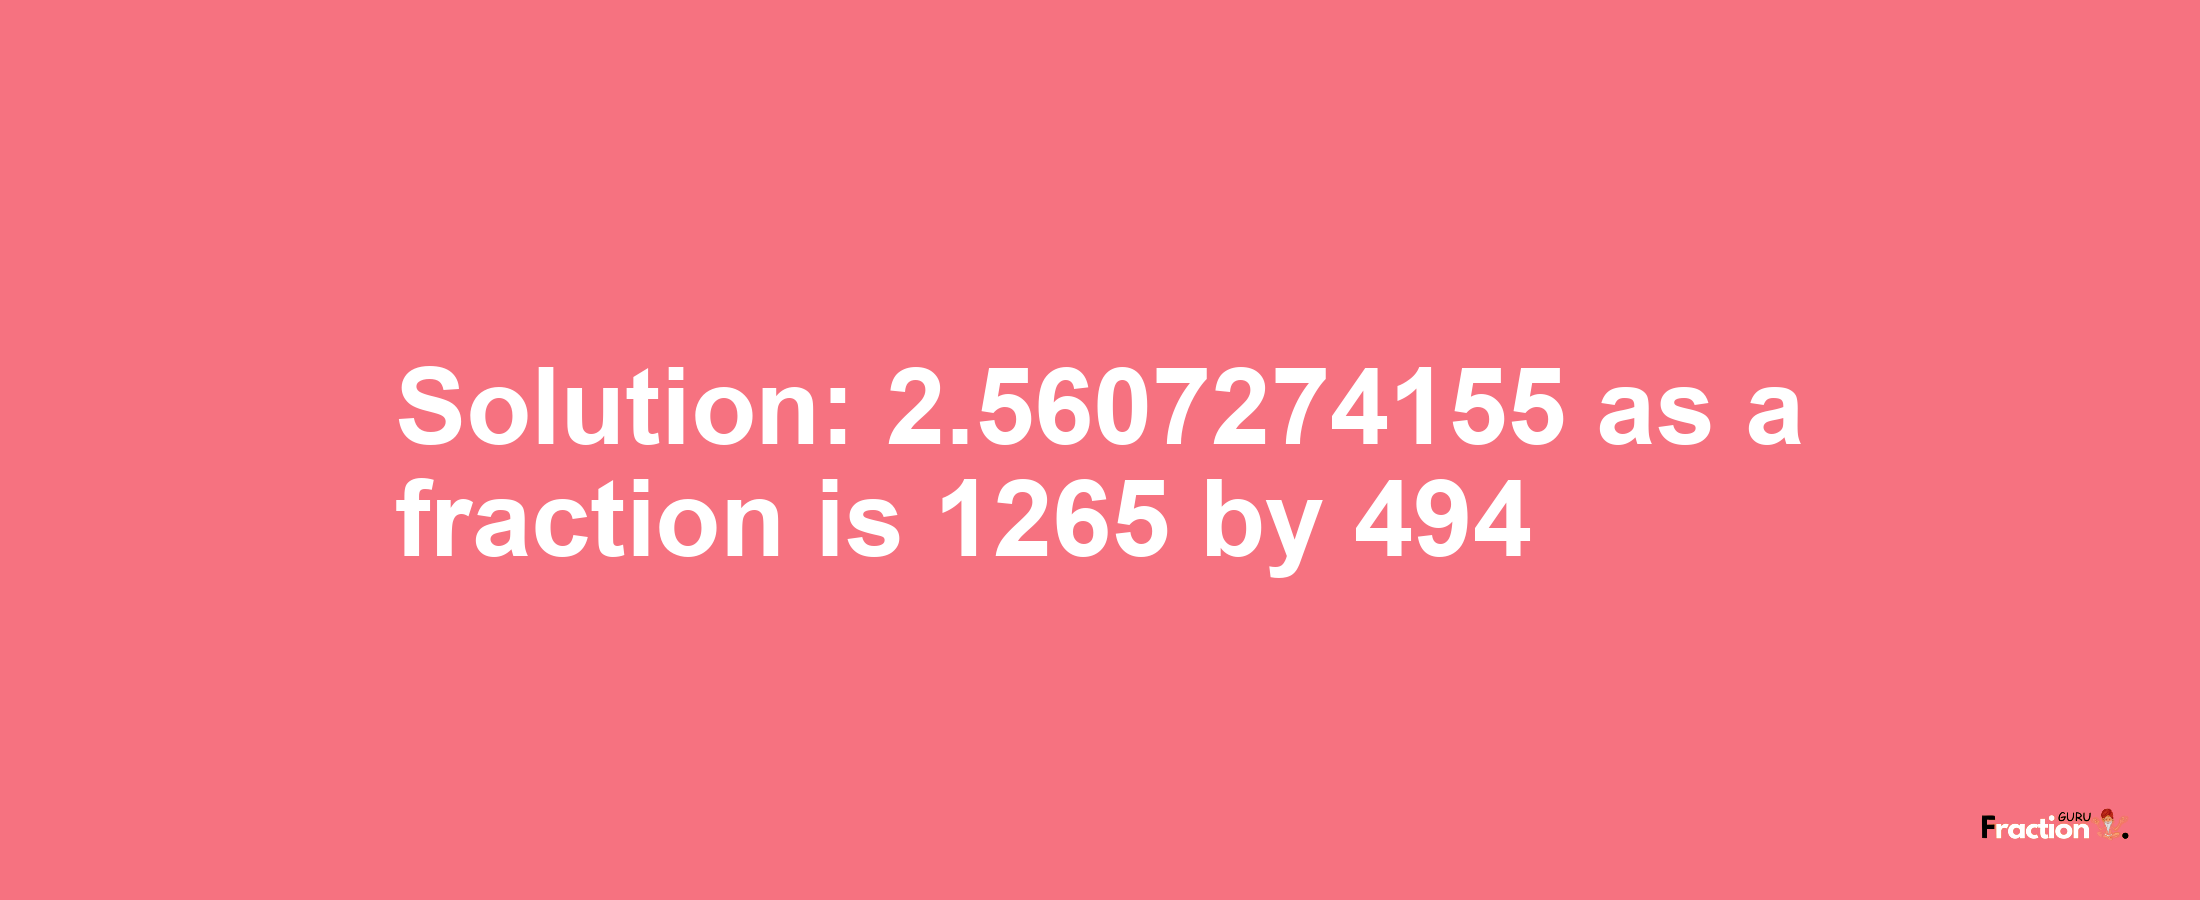 Solution:2.5607274155 as a fraction is 1265/494